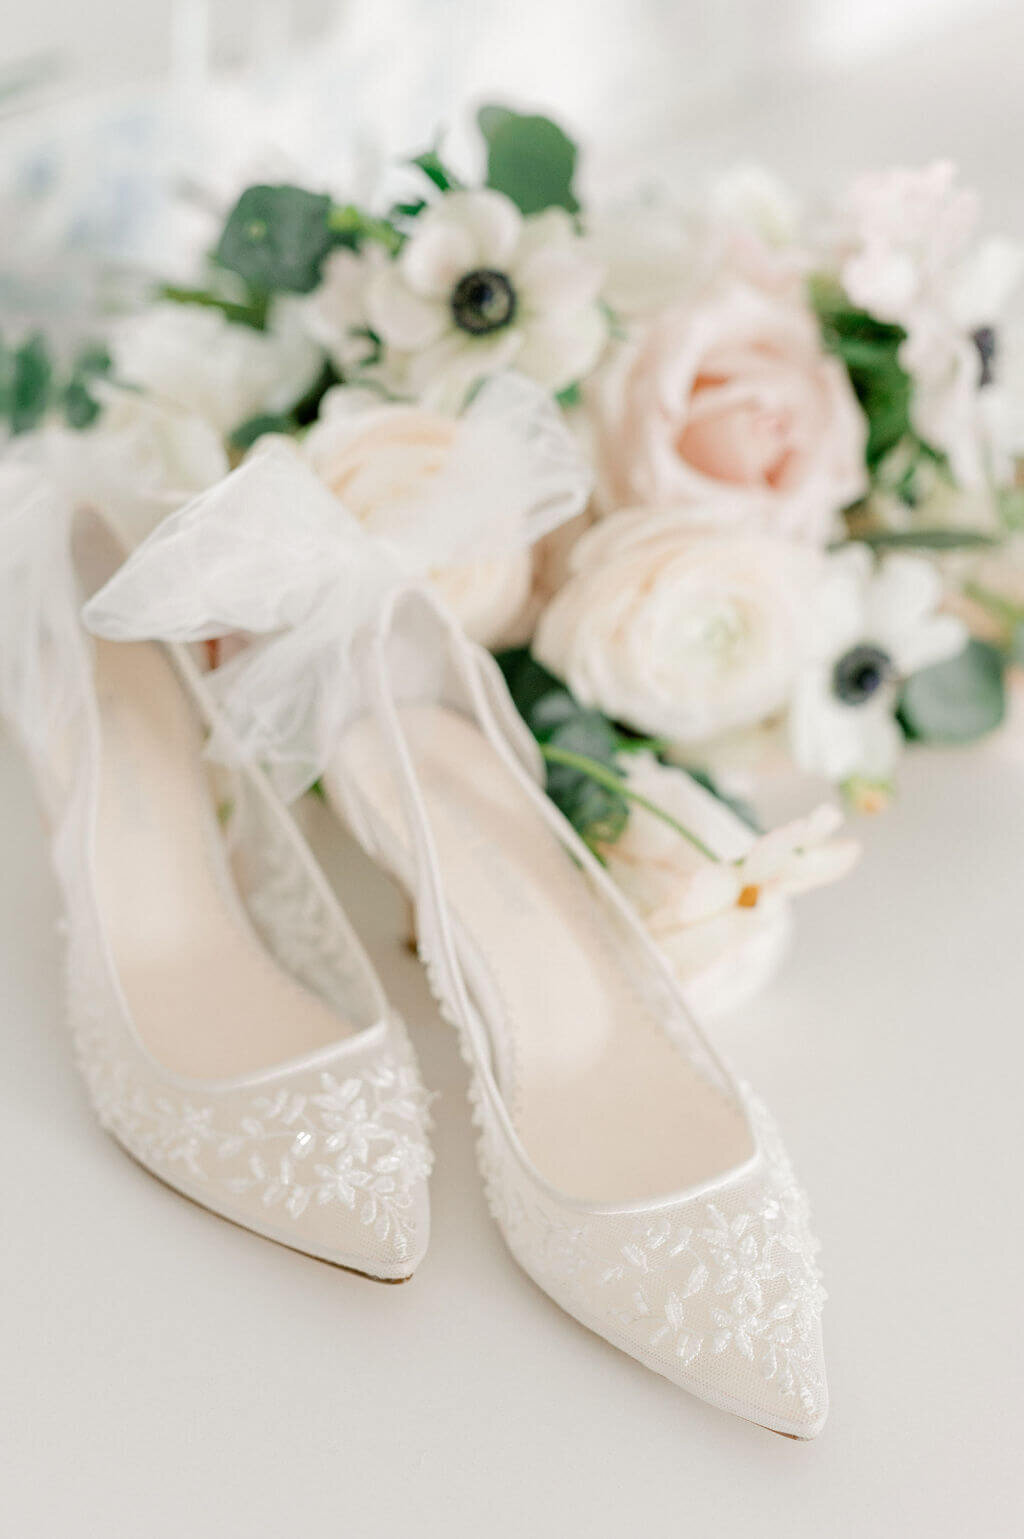 Bella Belle lace wedding shoes with blush bouquet for wedding photography portraits